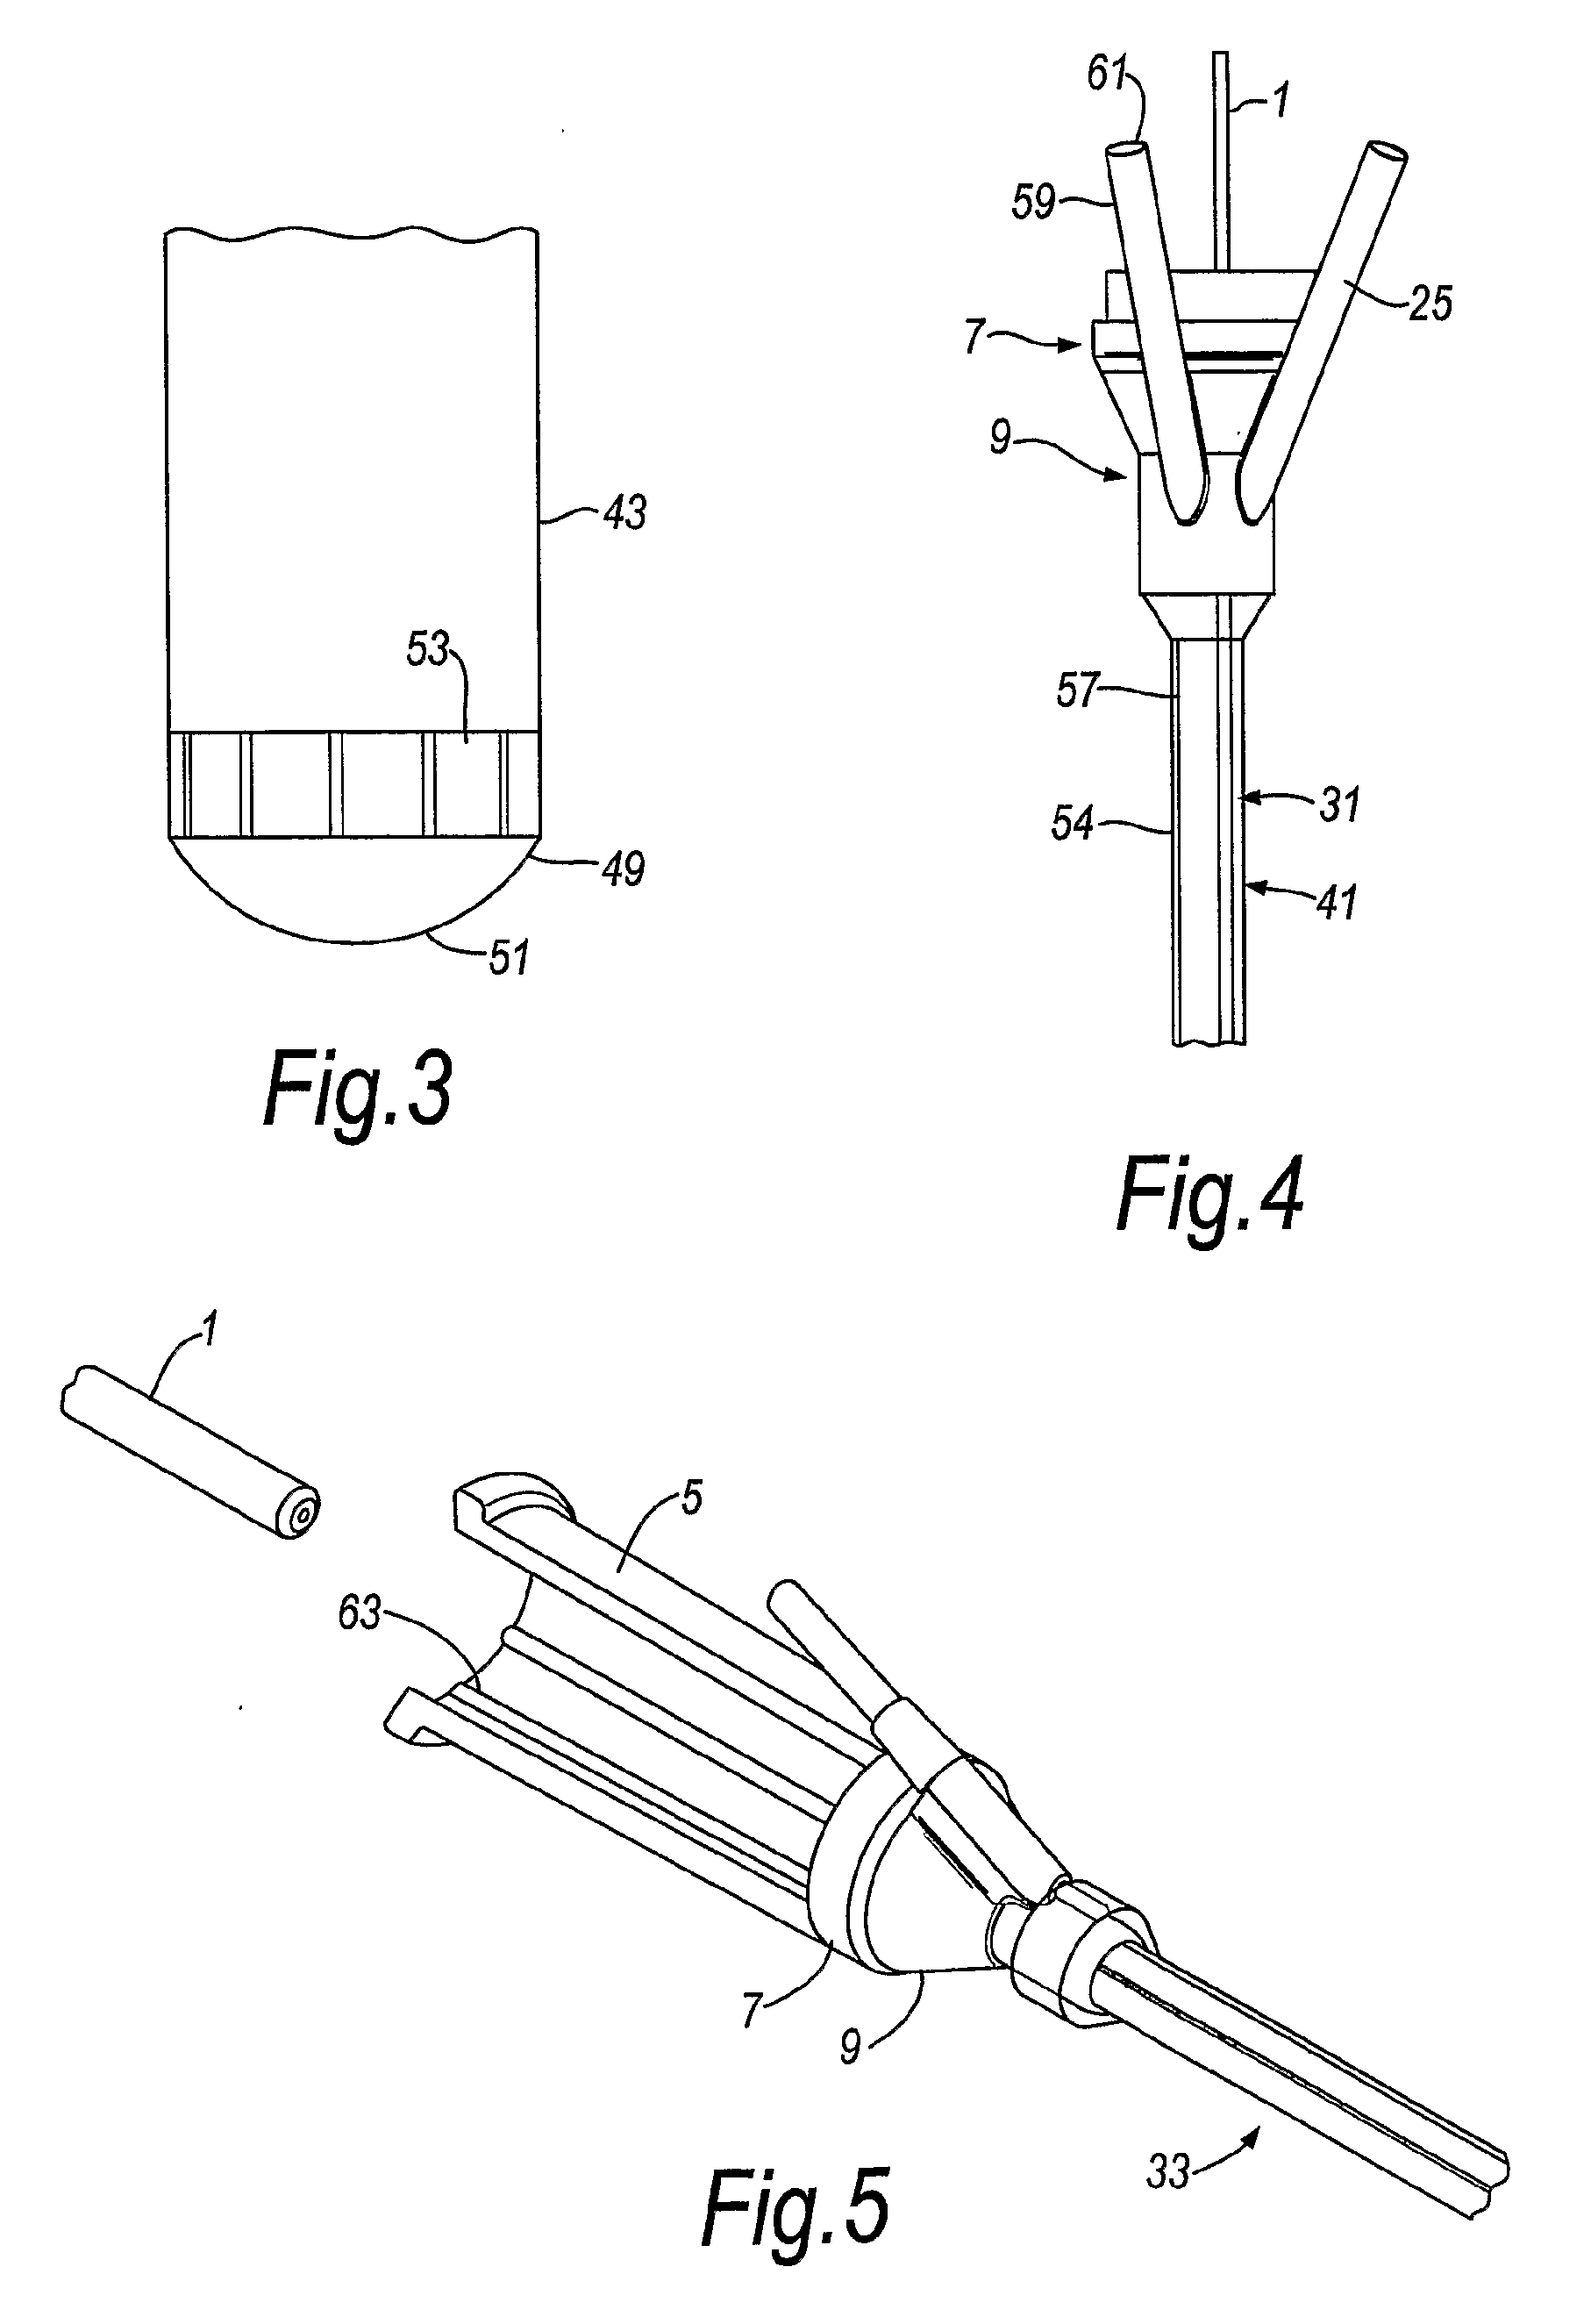 Apparatus for deploying endoscope